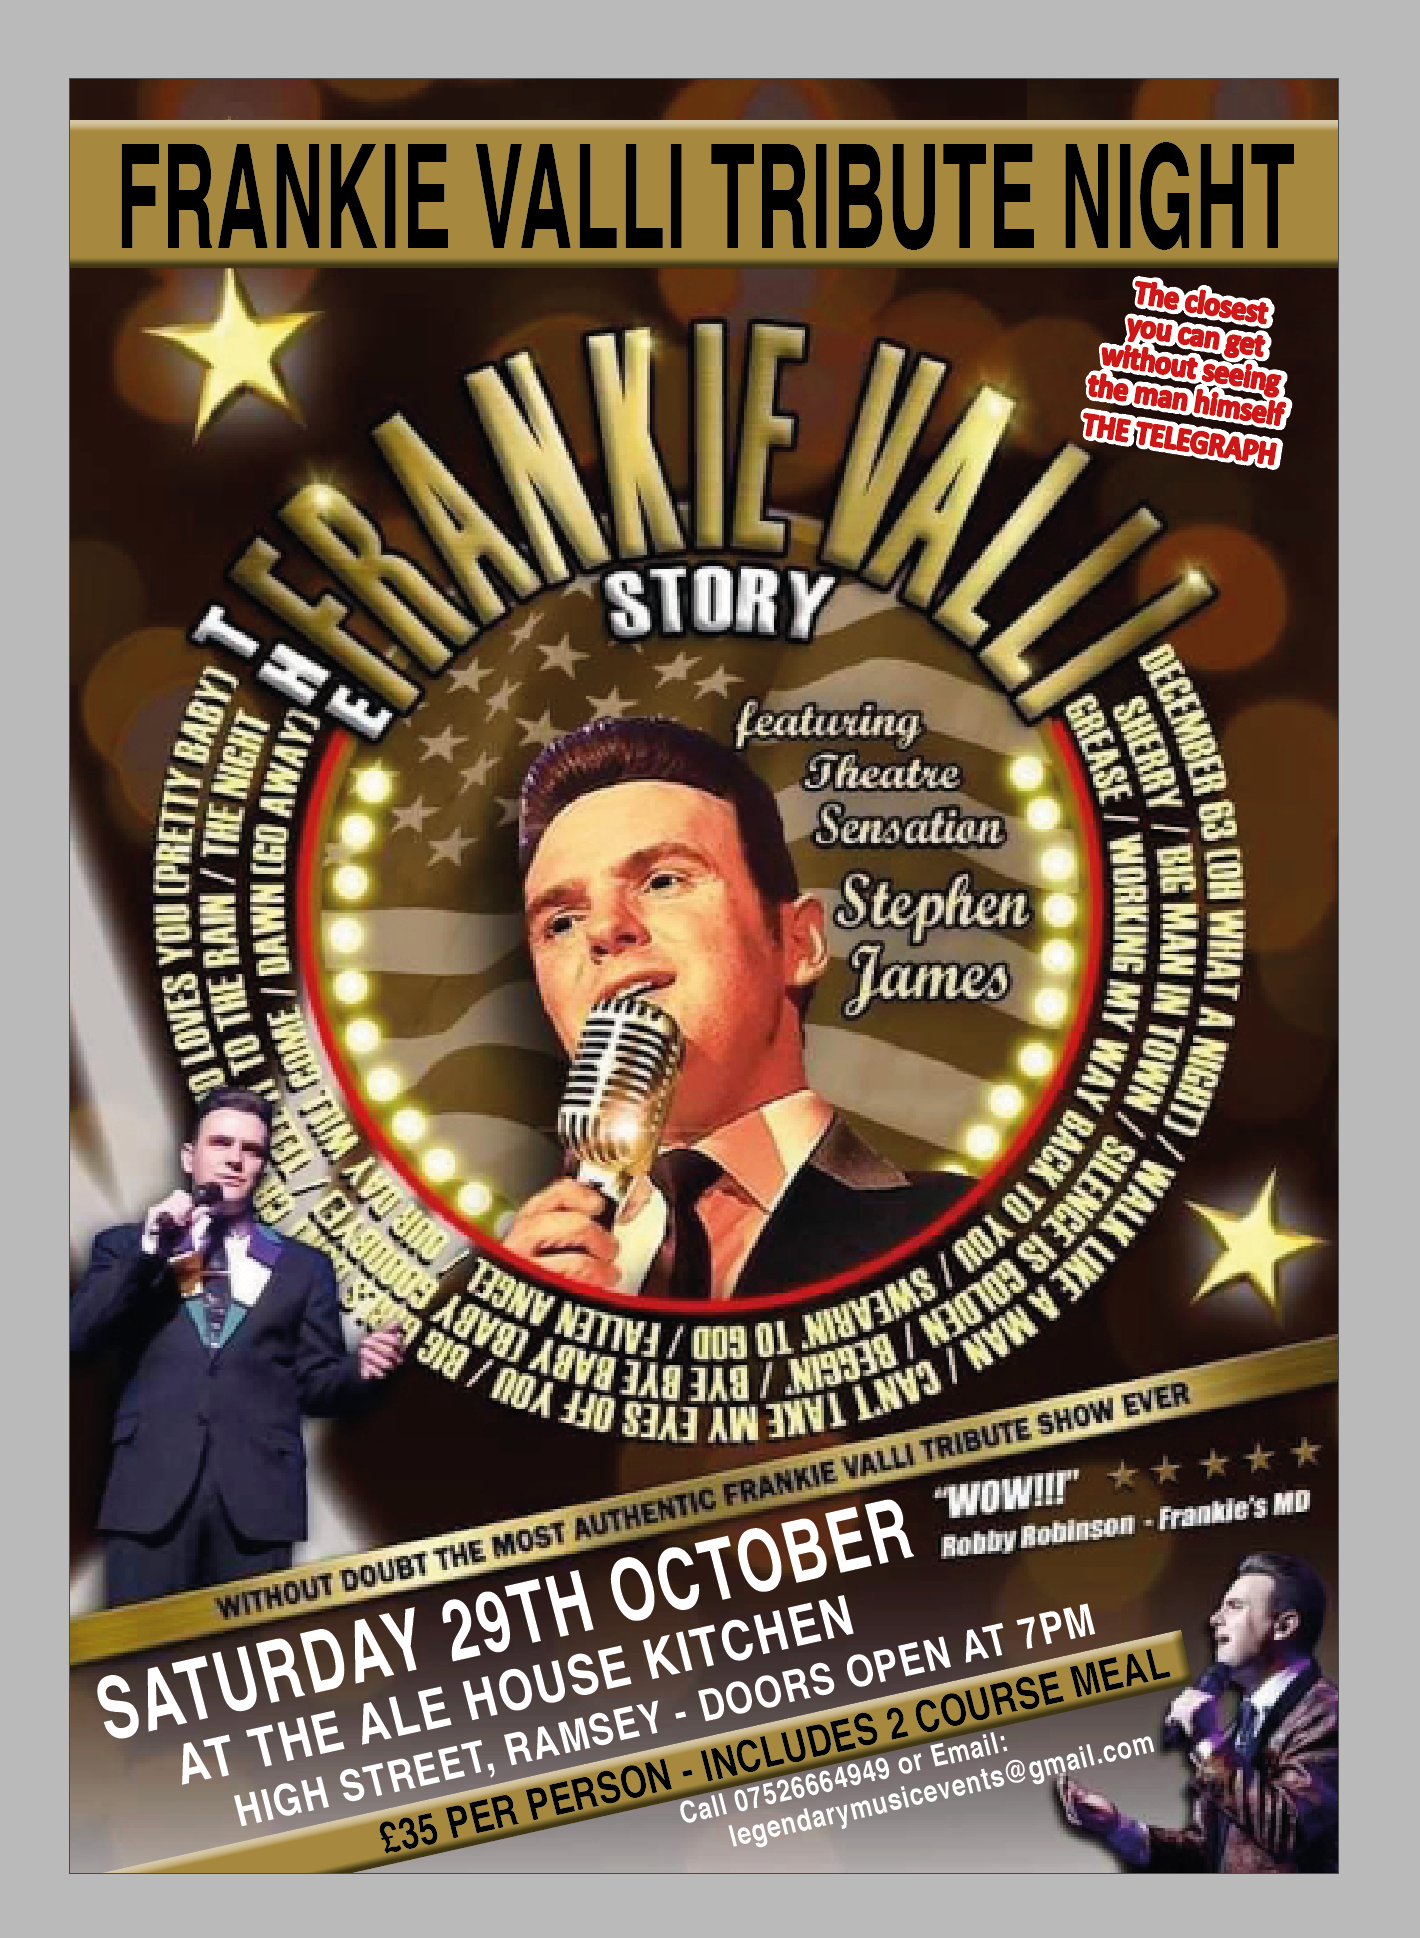 Frankie Valli Tribute inc 2 Course Meal  on Oct 29, 19:00@The Ale House Kitchen - Buy tickets and Get information on whittlesey music nights 